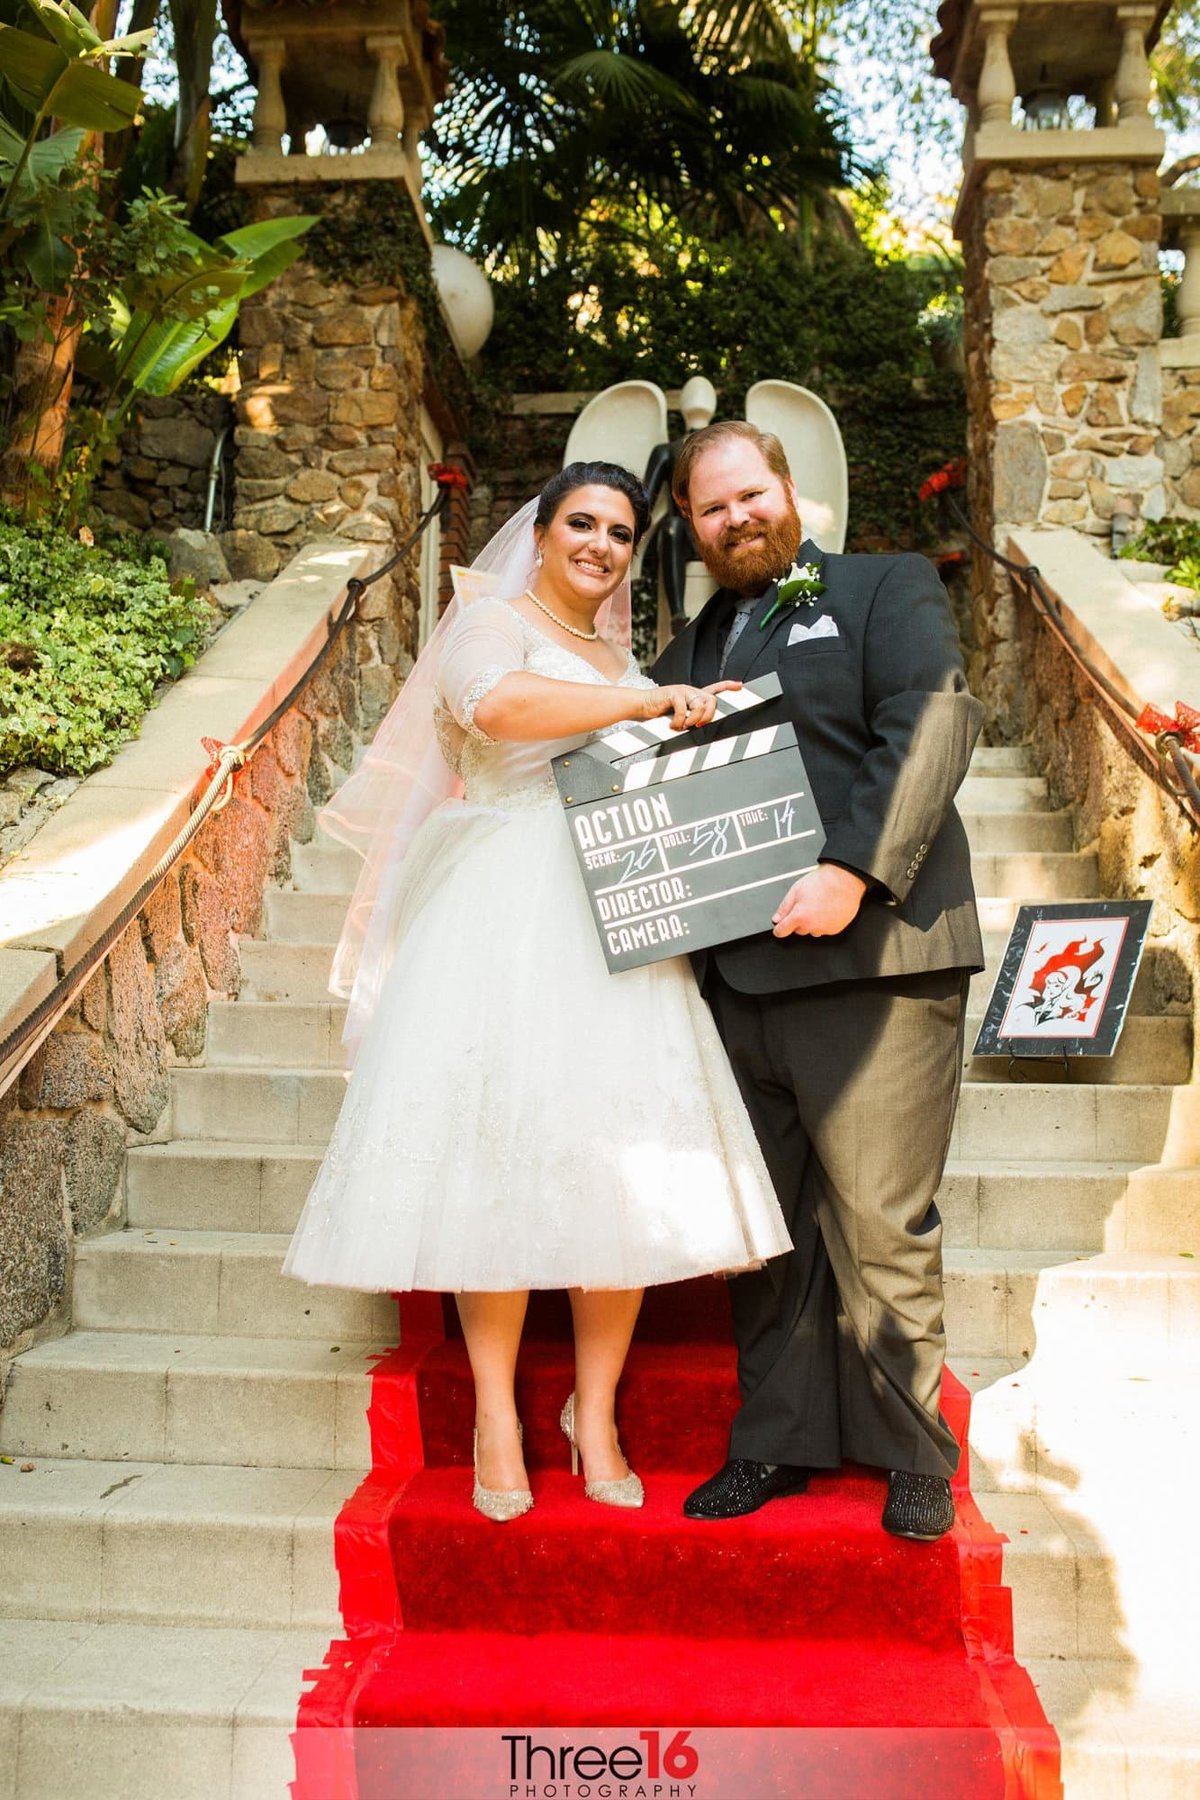 Bride and Groom pose on a a red carpet on stairs with a movie director sign